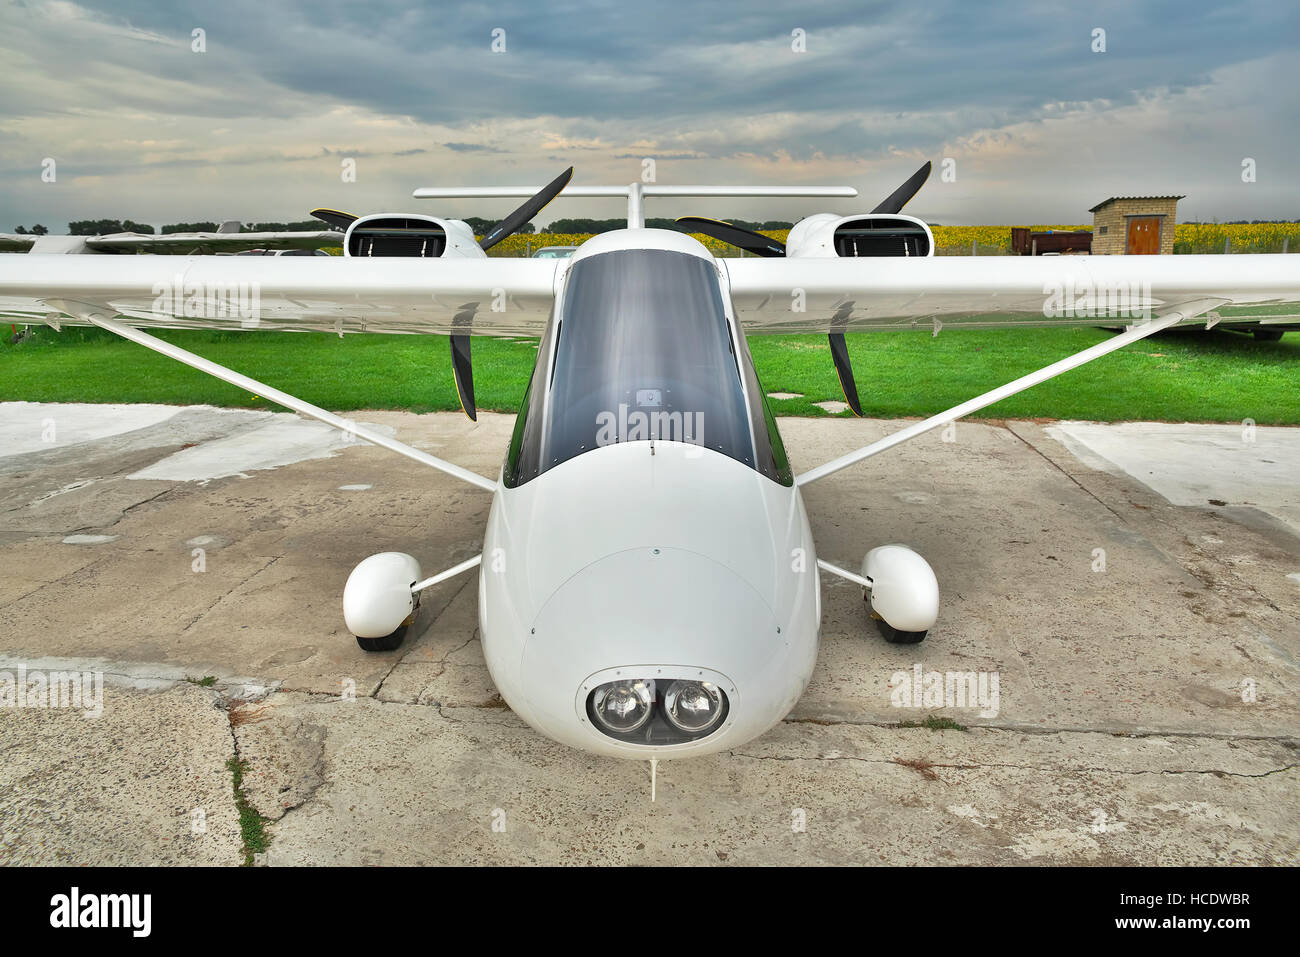 Kiev Region, Ukraine - July 19, 2014: Light private twin-engine plane parked on an airfield with stormy sky the background - front view Stock Photo